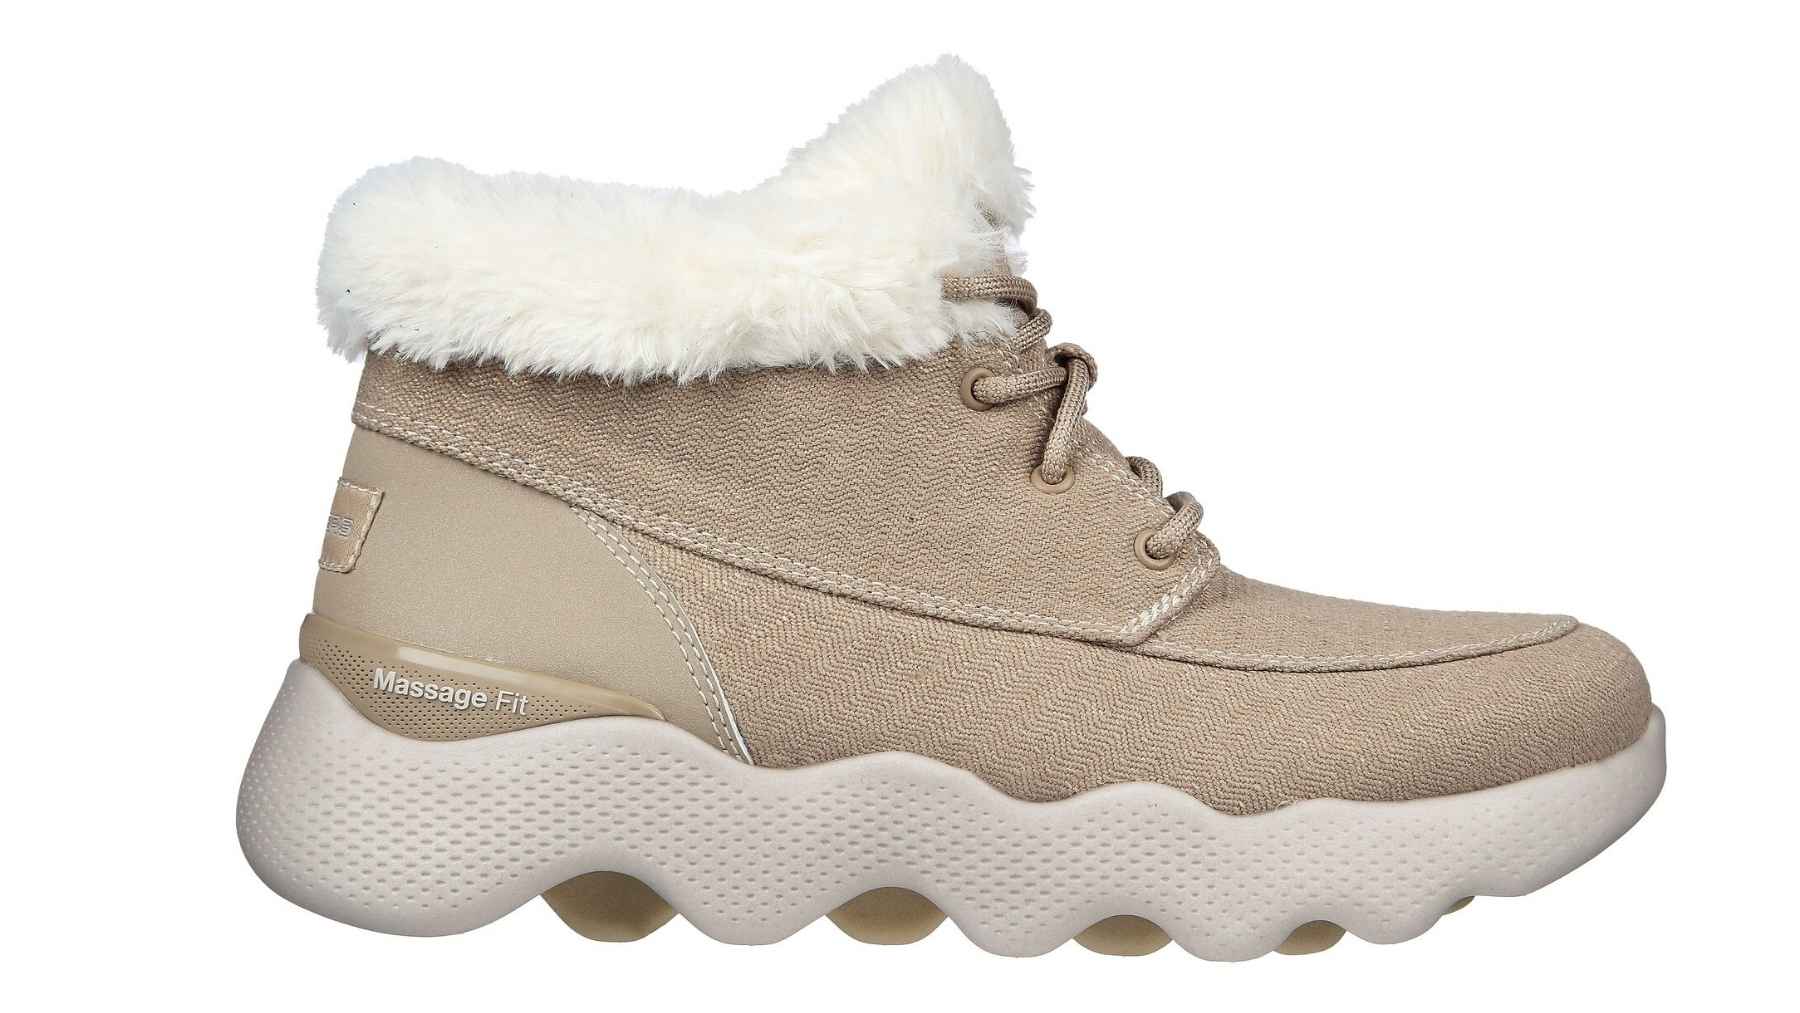 Skechers boots that massage every step are ideal to keep your feet warm ...